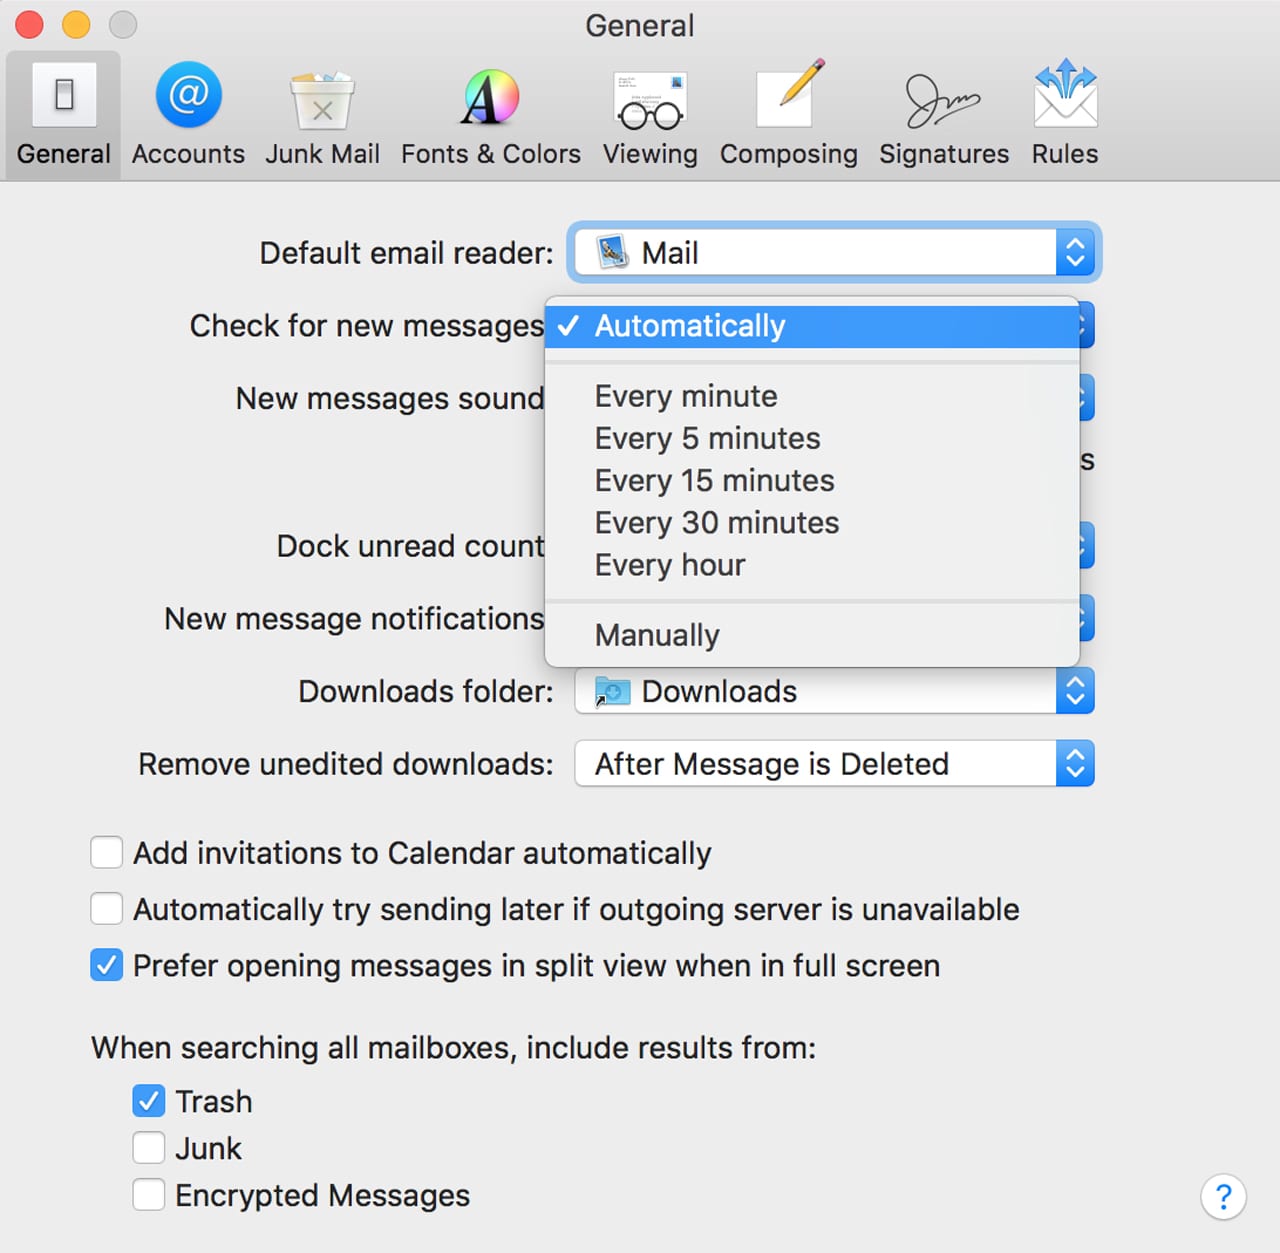 Check for new messages settings.